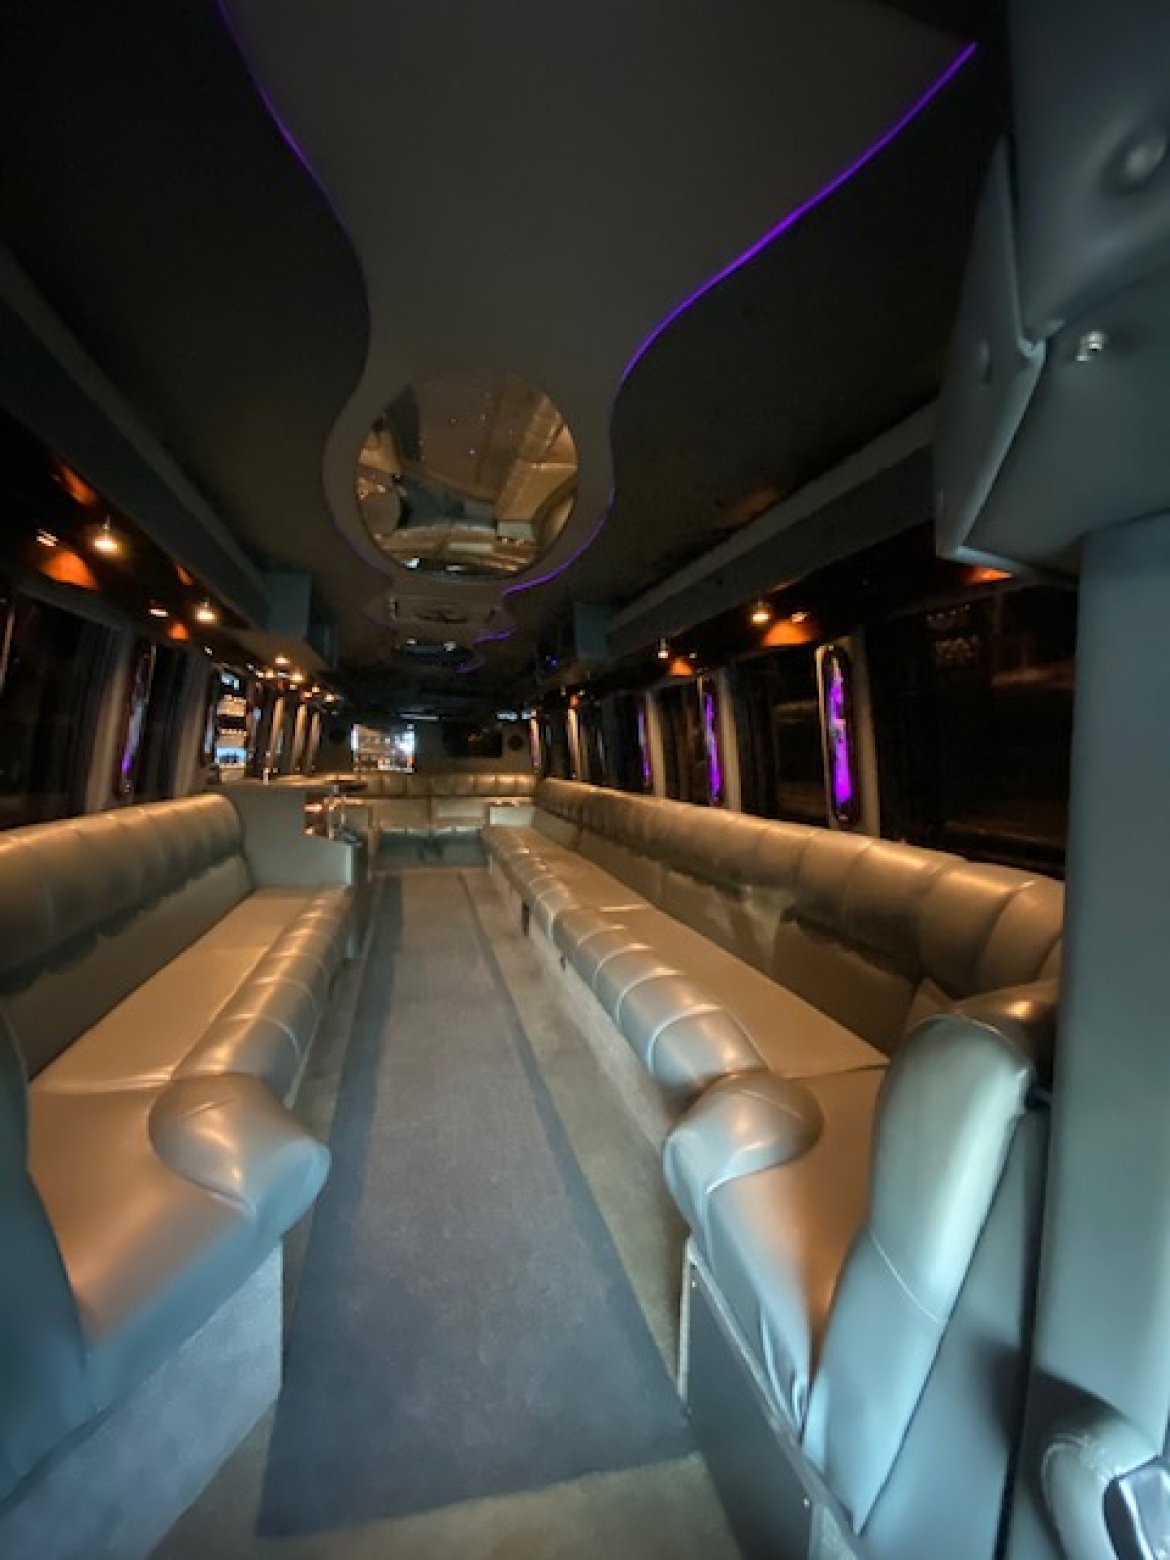 Limo Bus for sale: 2007 Chevrolet 5500 Diesel Limo Bus by Turtle Top